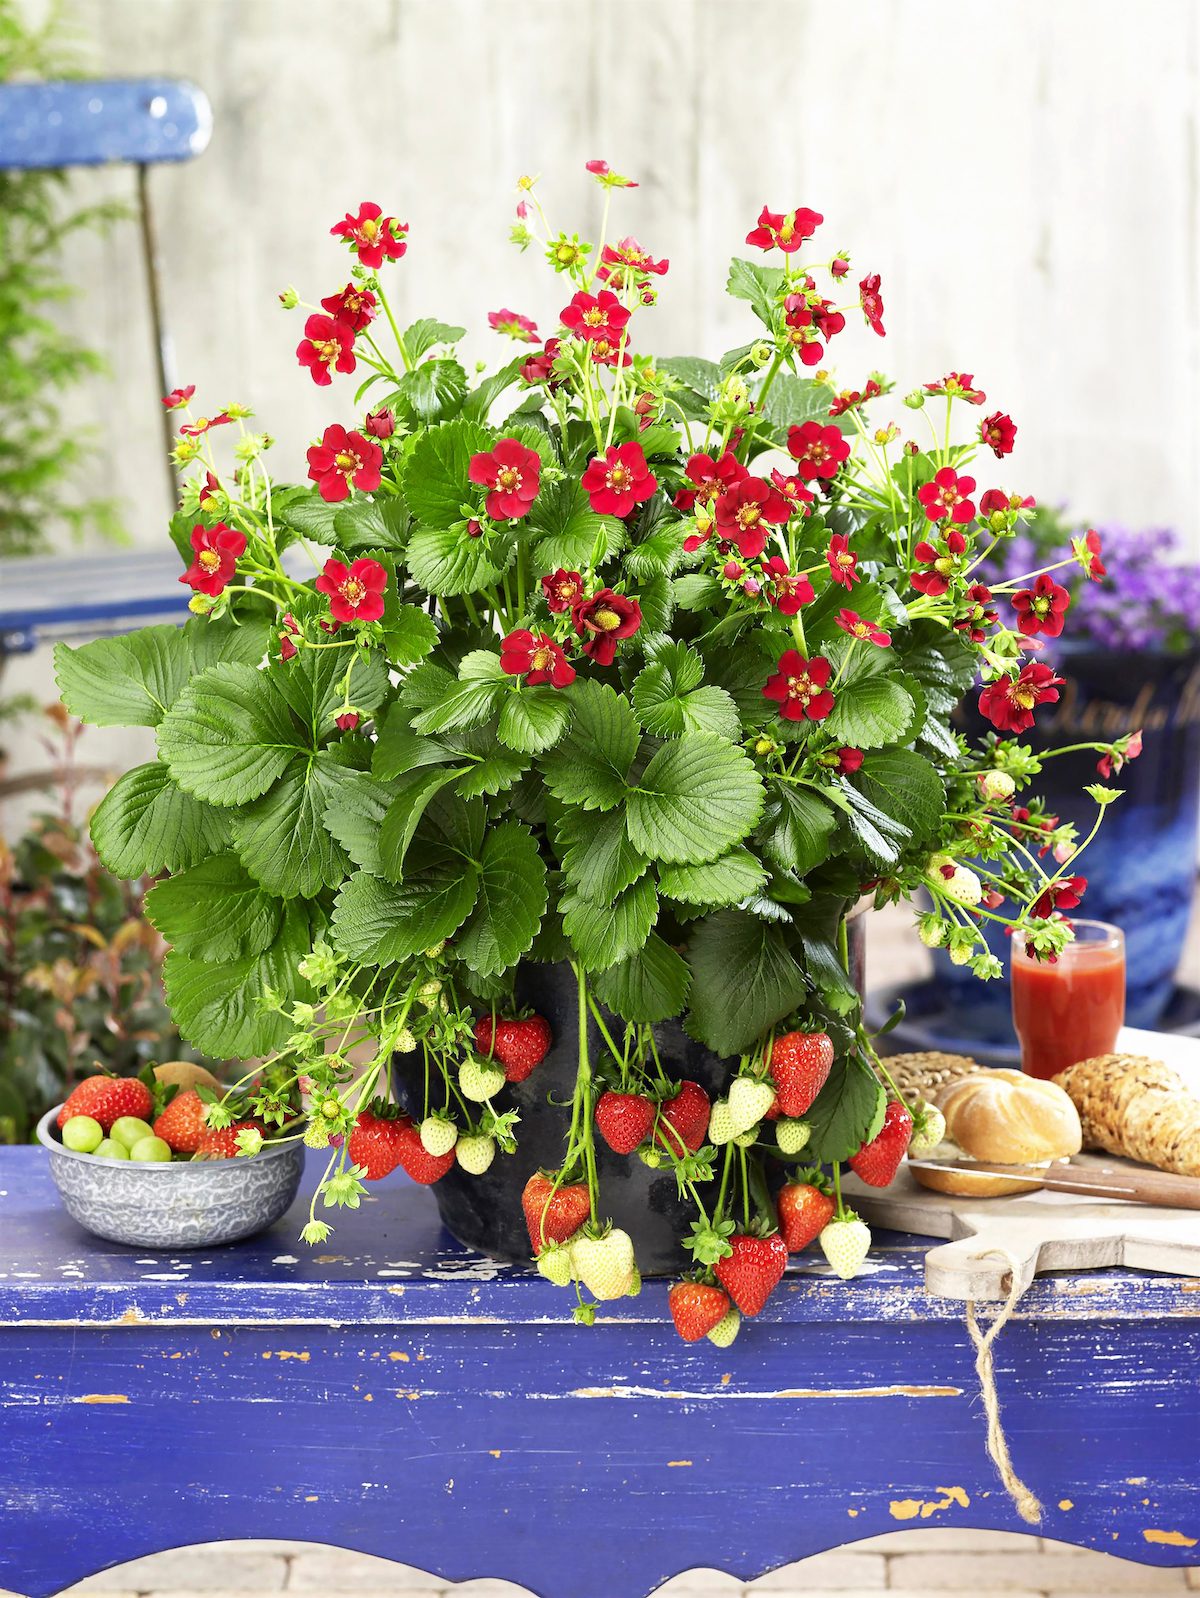 How to Grow Your Own Fresh Strawberry Patch